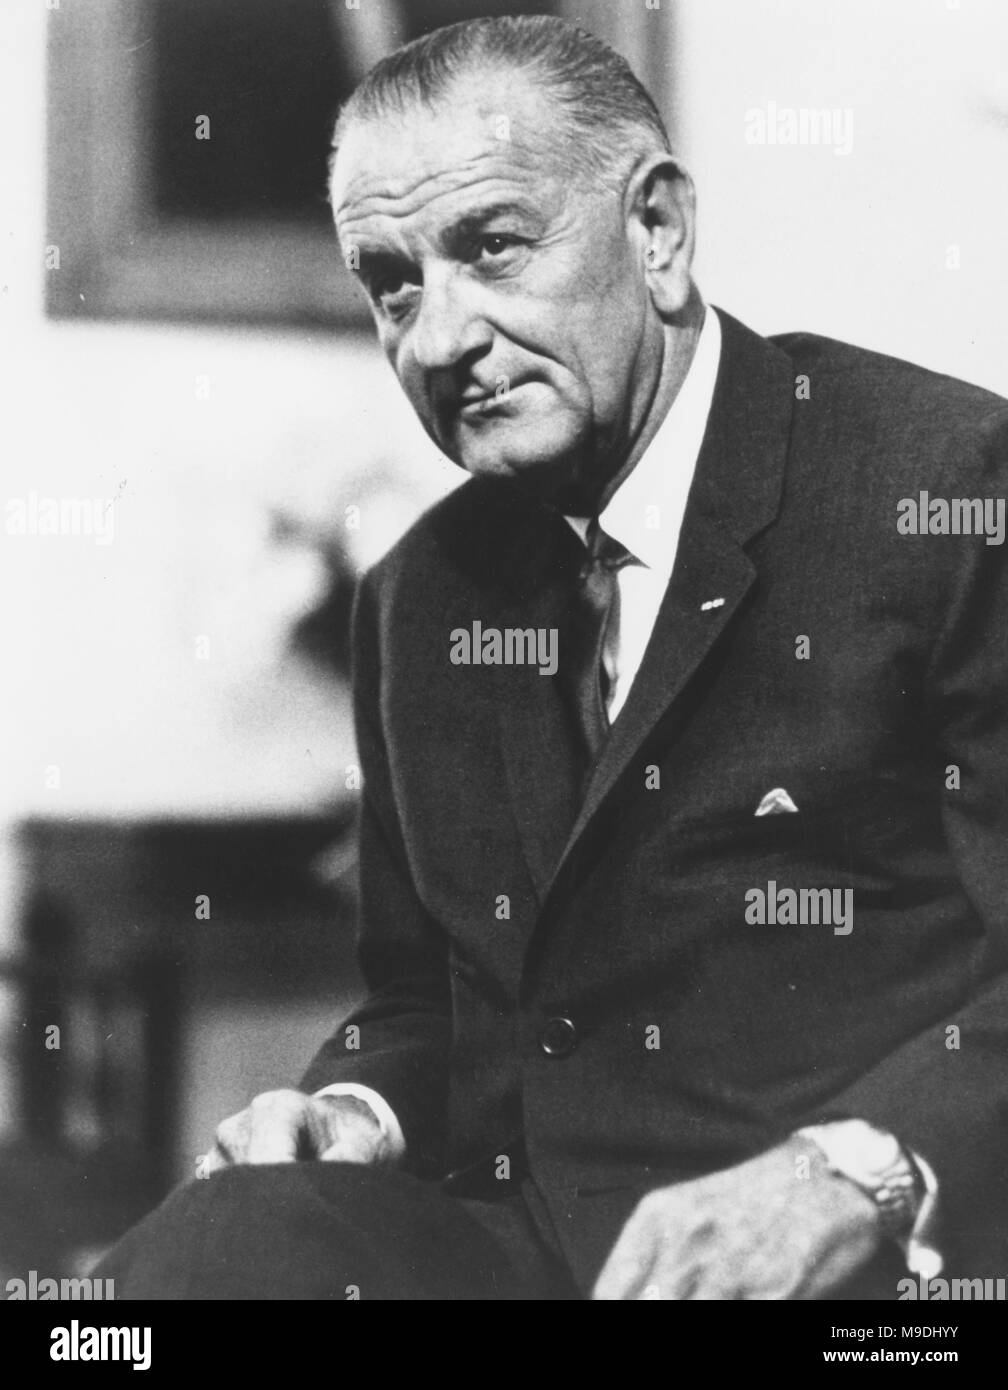 Lyndon Baines Johnson (1908 – 1973), LBJ, American politician and 36th President of the United States from 1963 to 1969 Stock Photo